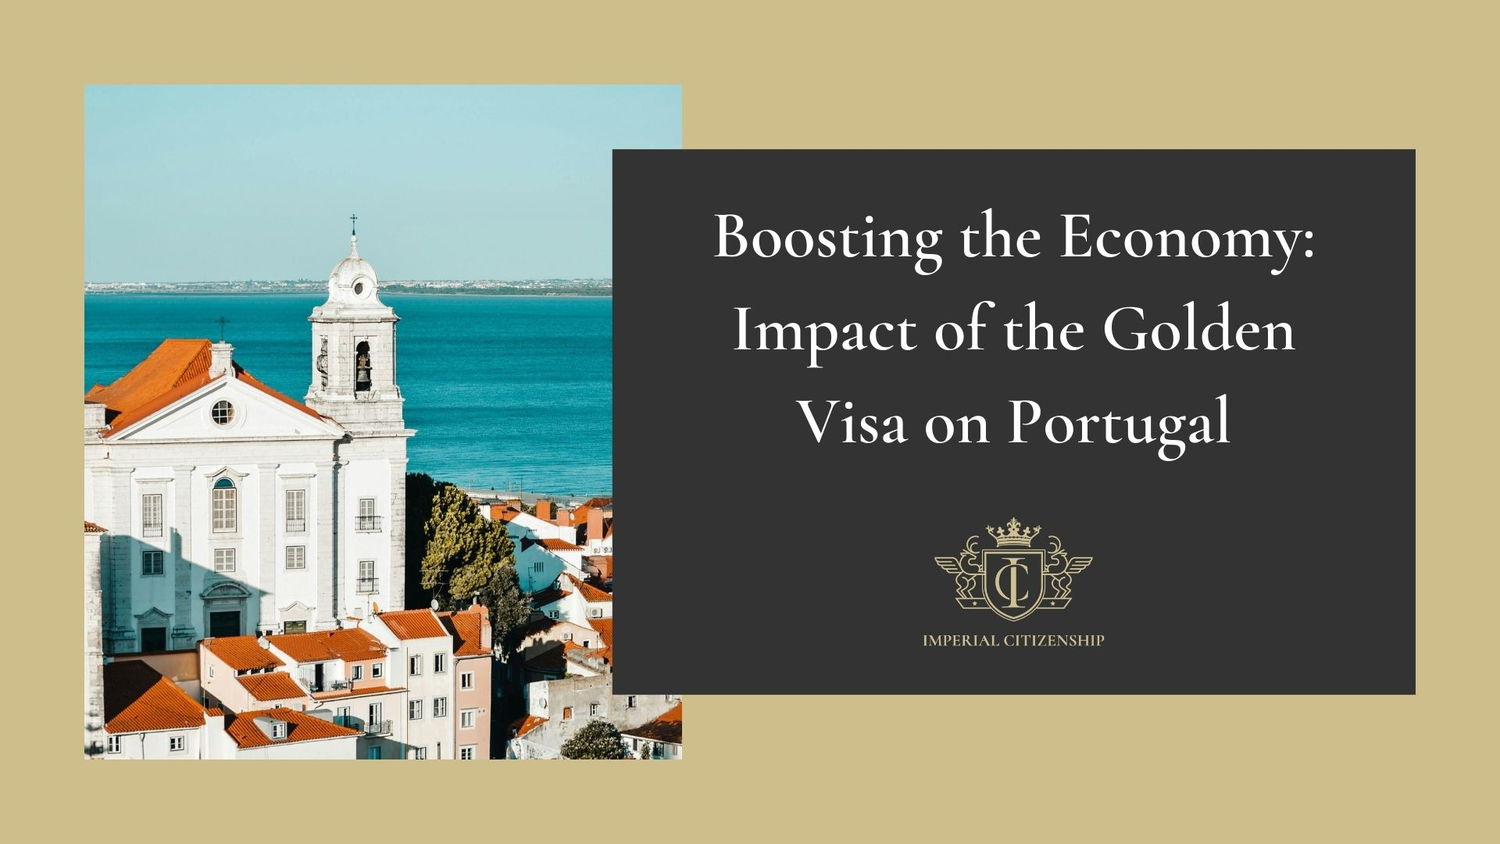 Impact of the Golden Visa on Portugal